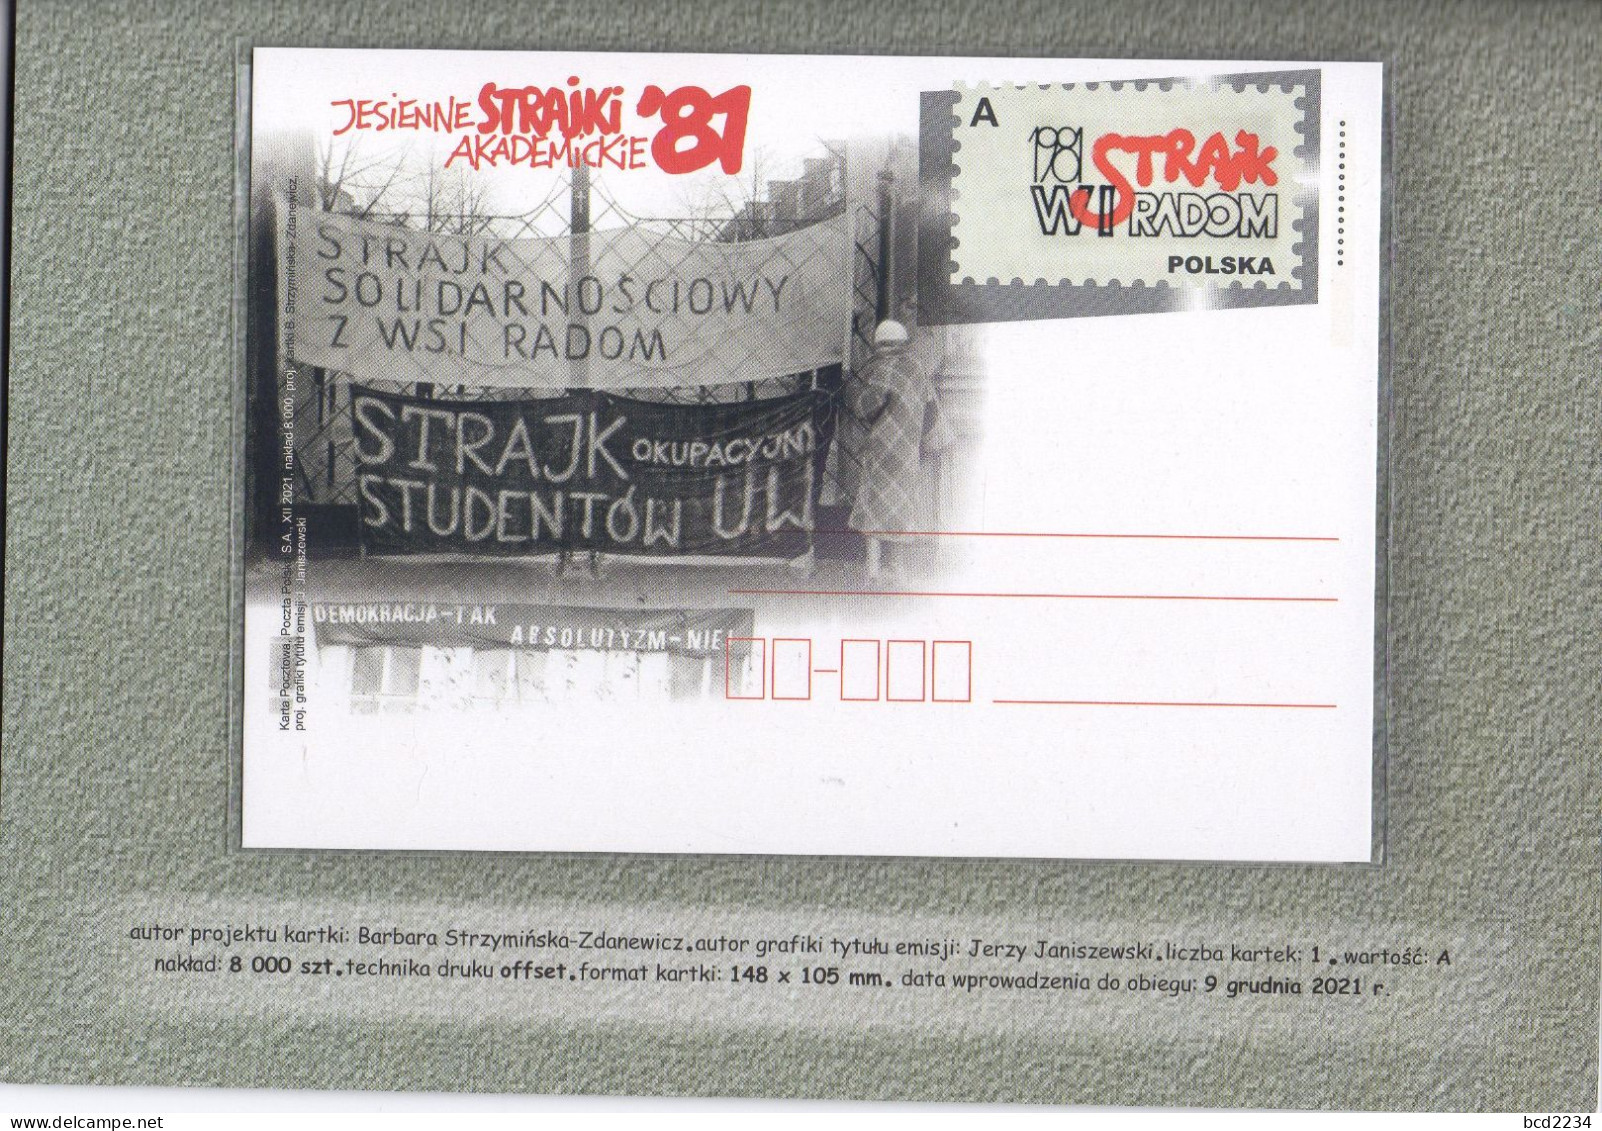 POLAND 2021 POST OFFICE LIMITED EDITION FOLDER: AUTUMN ACADEMIC STUDENT STRIKES '81 SOLIDARITY SOLIDARNOSC ANTICOMMUNISM - Covers & Documents